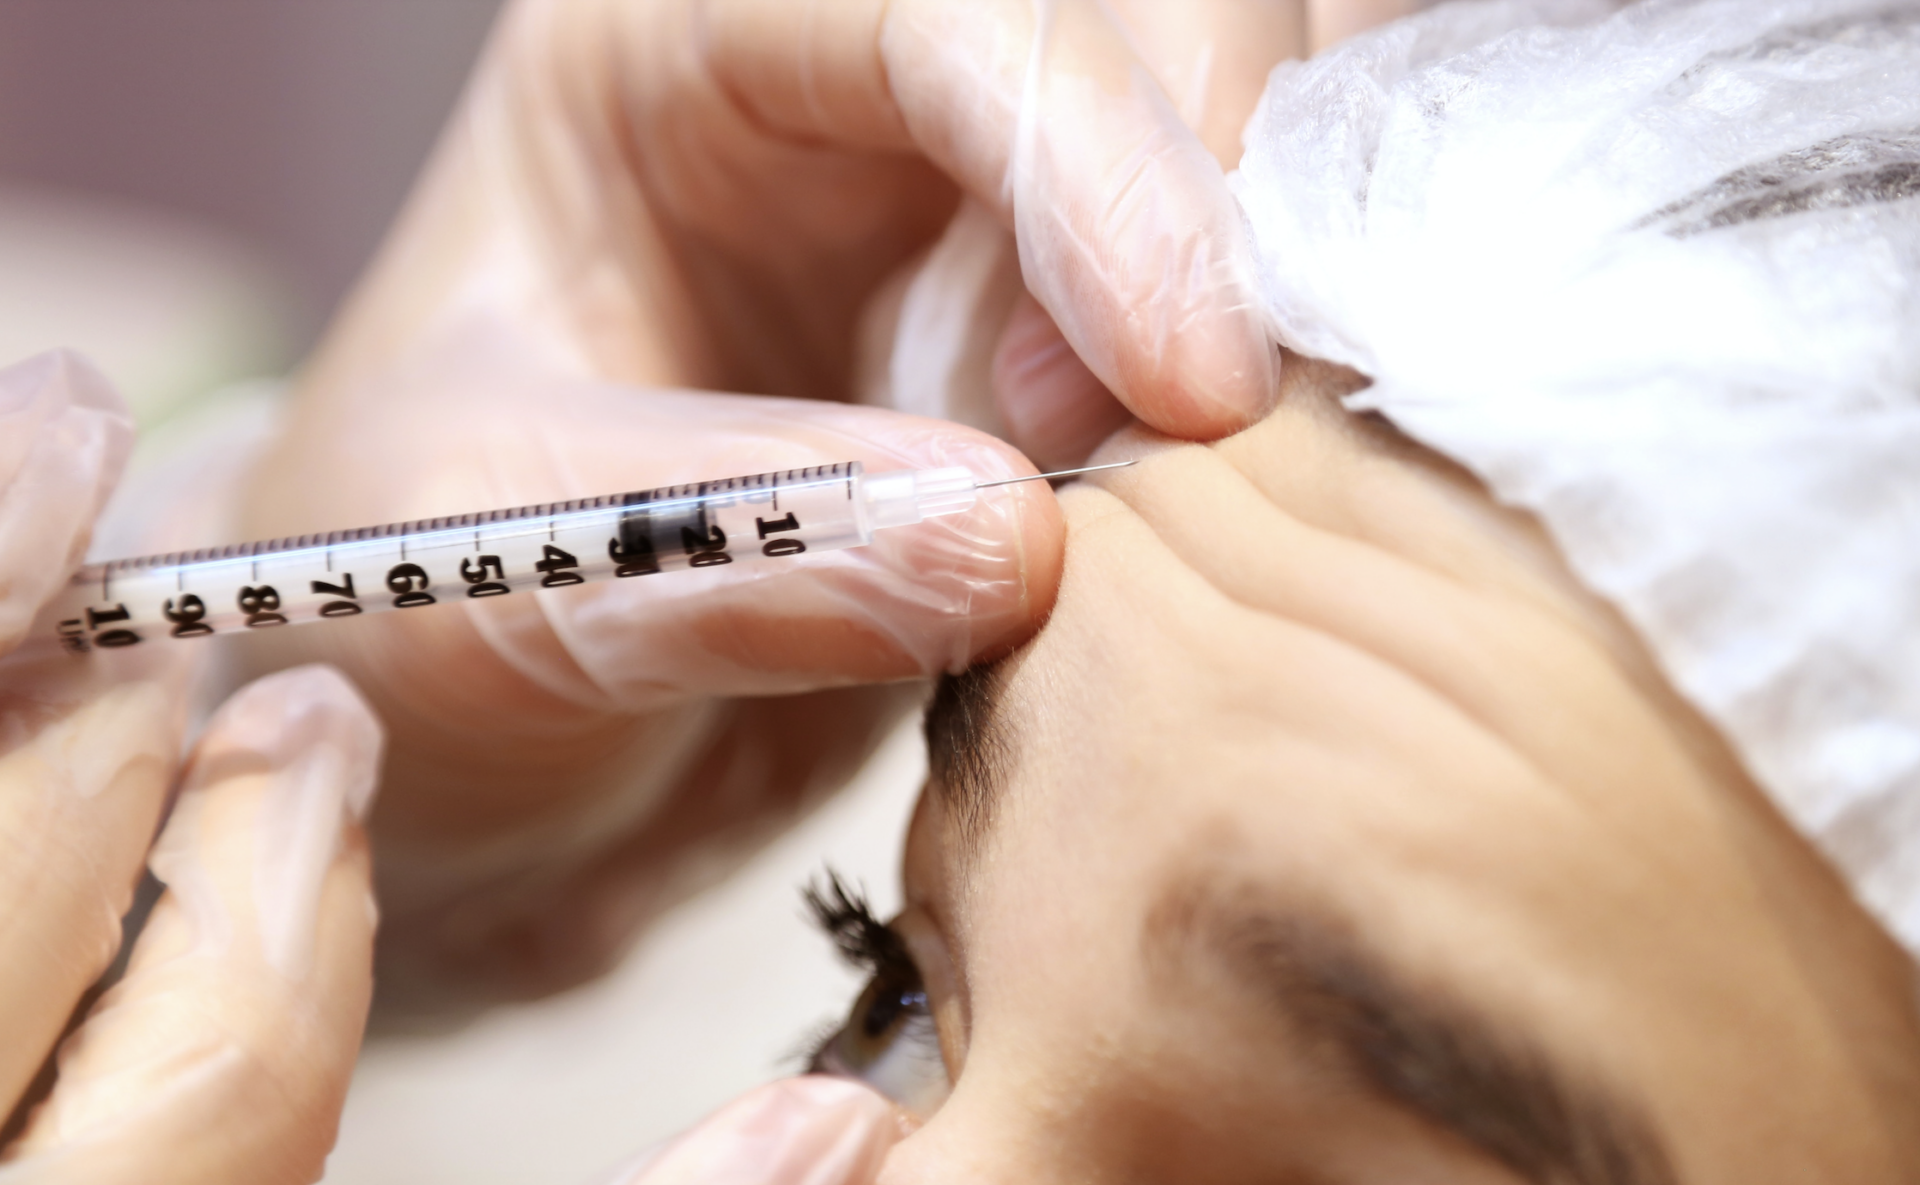 Doctor injecting botox into patient's forehead